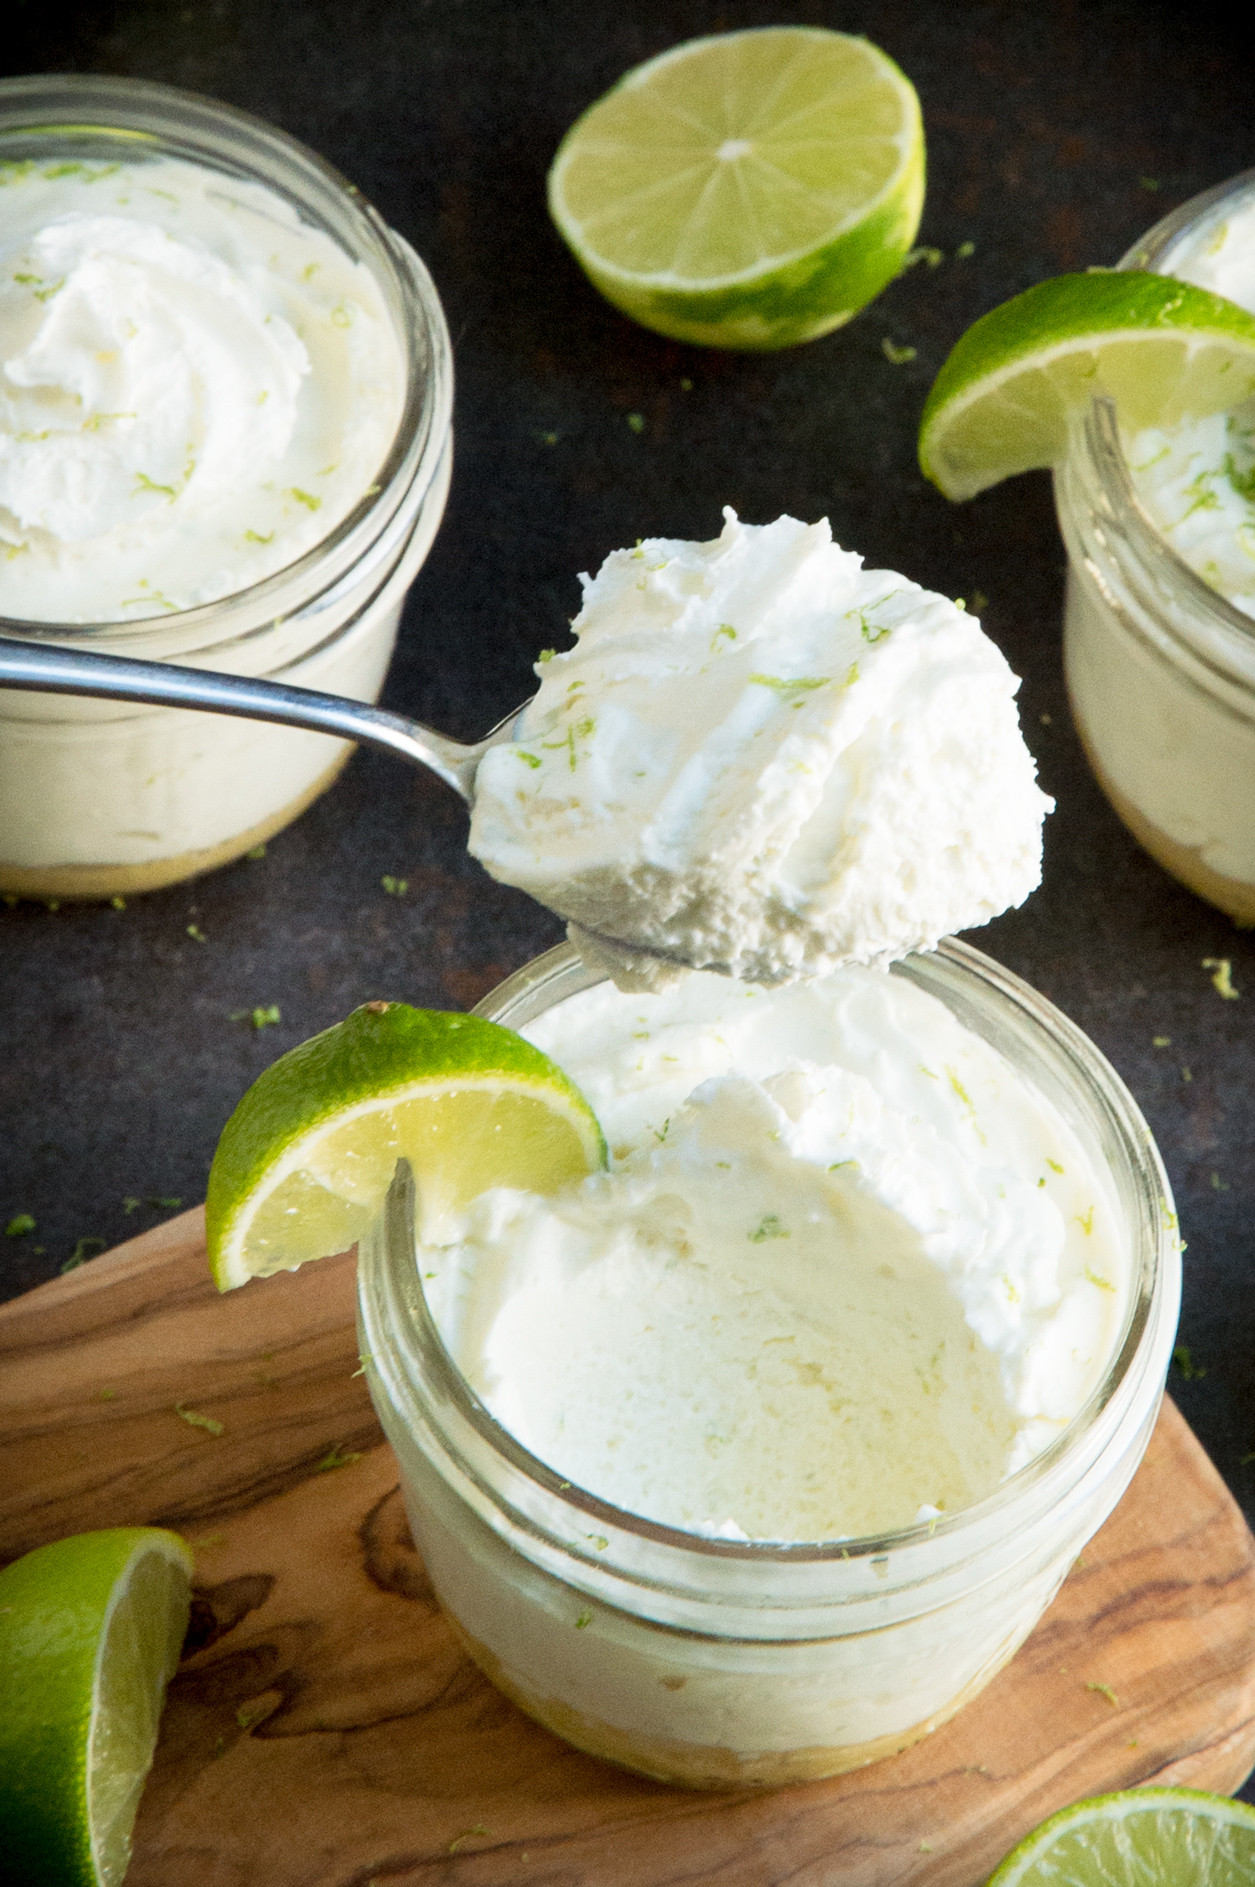 Taking a spoonful of the keto key lime cheesecake.